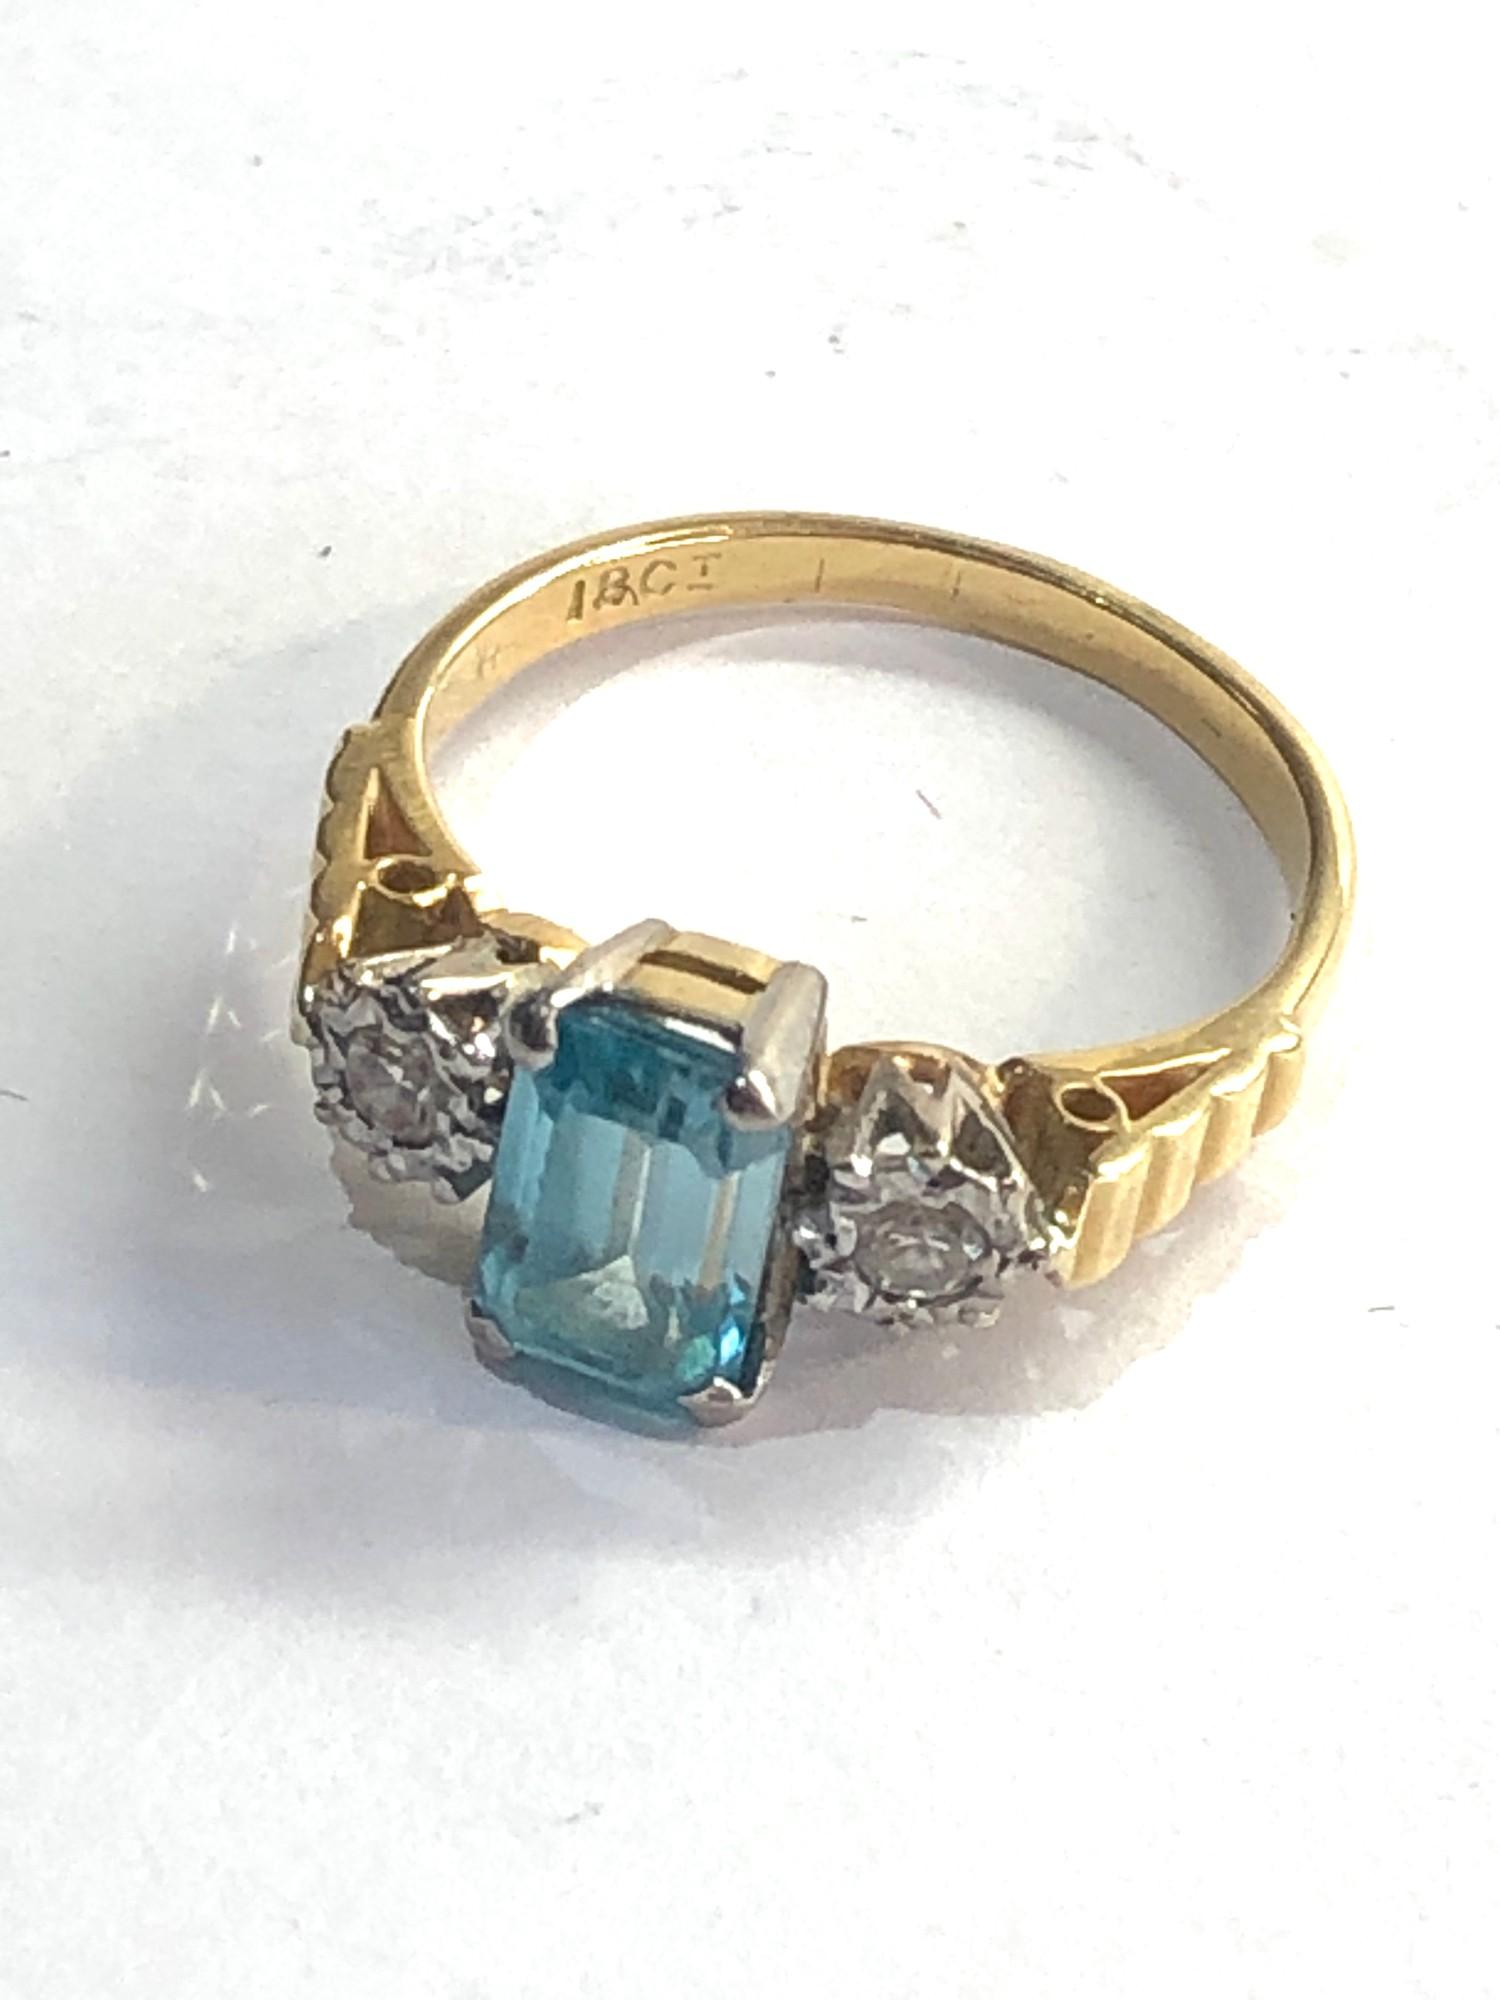 Vintage 18ct gold diamond and blue stone ring weight 4g - Image 3 of 4